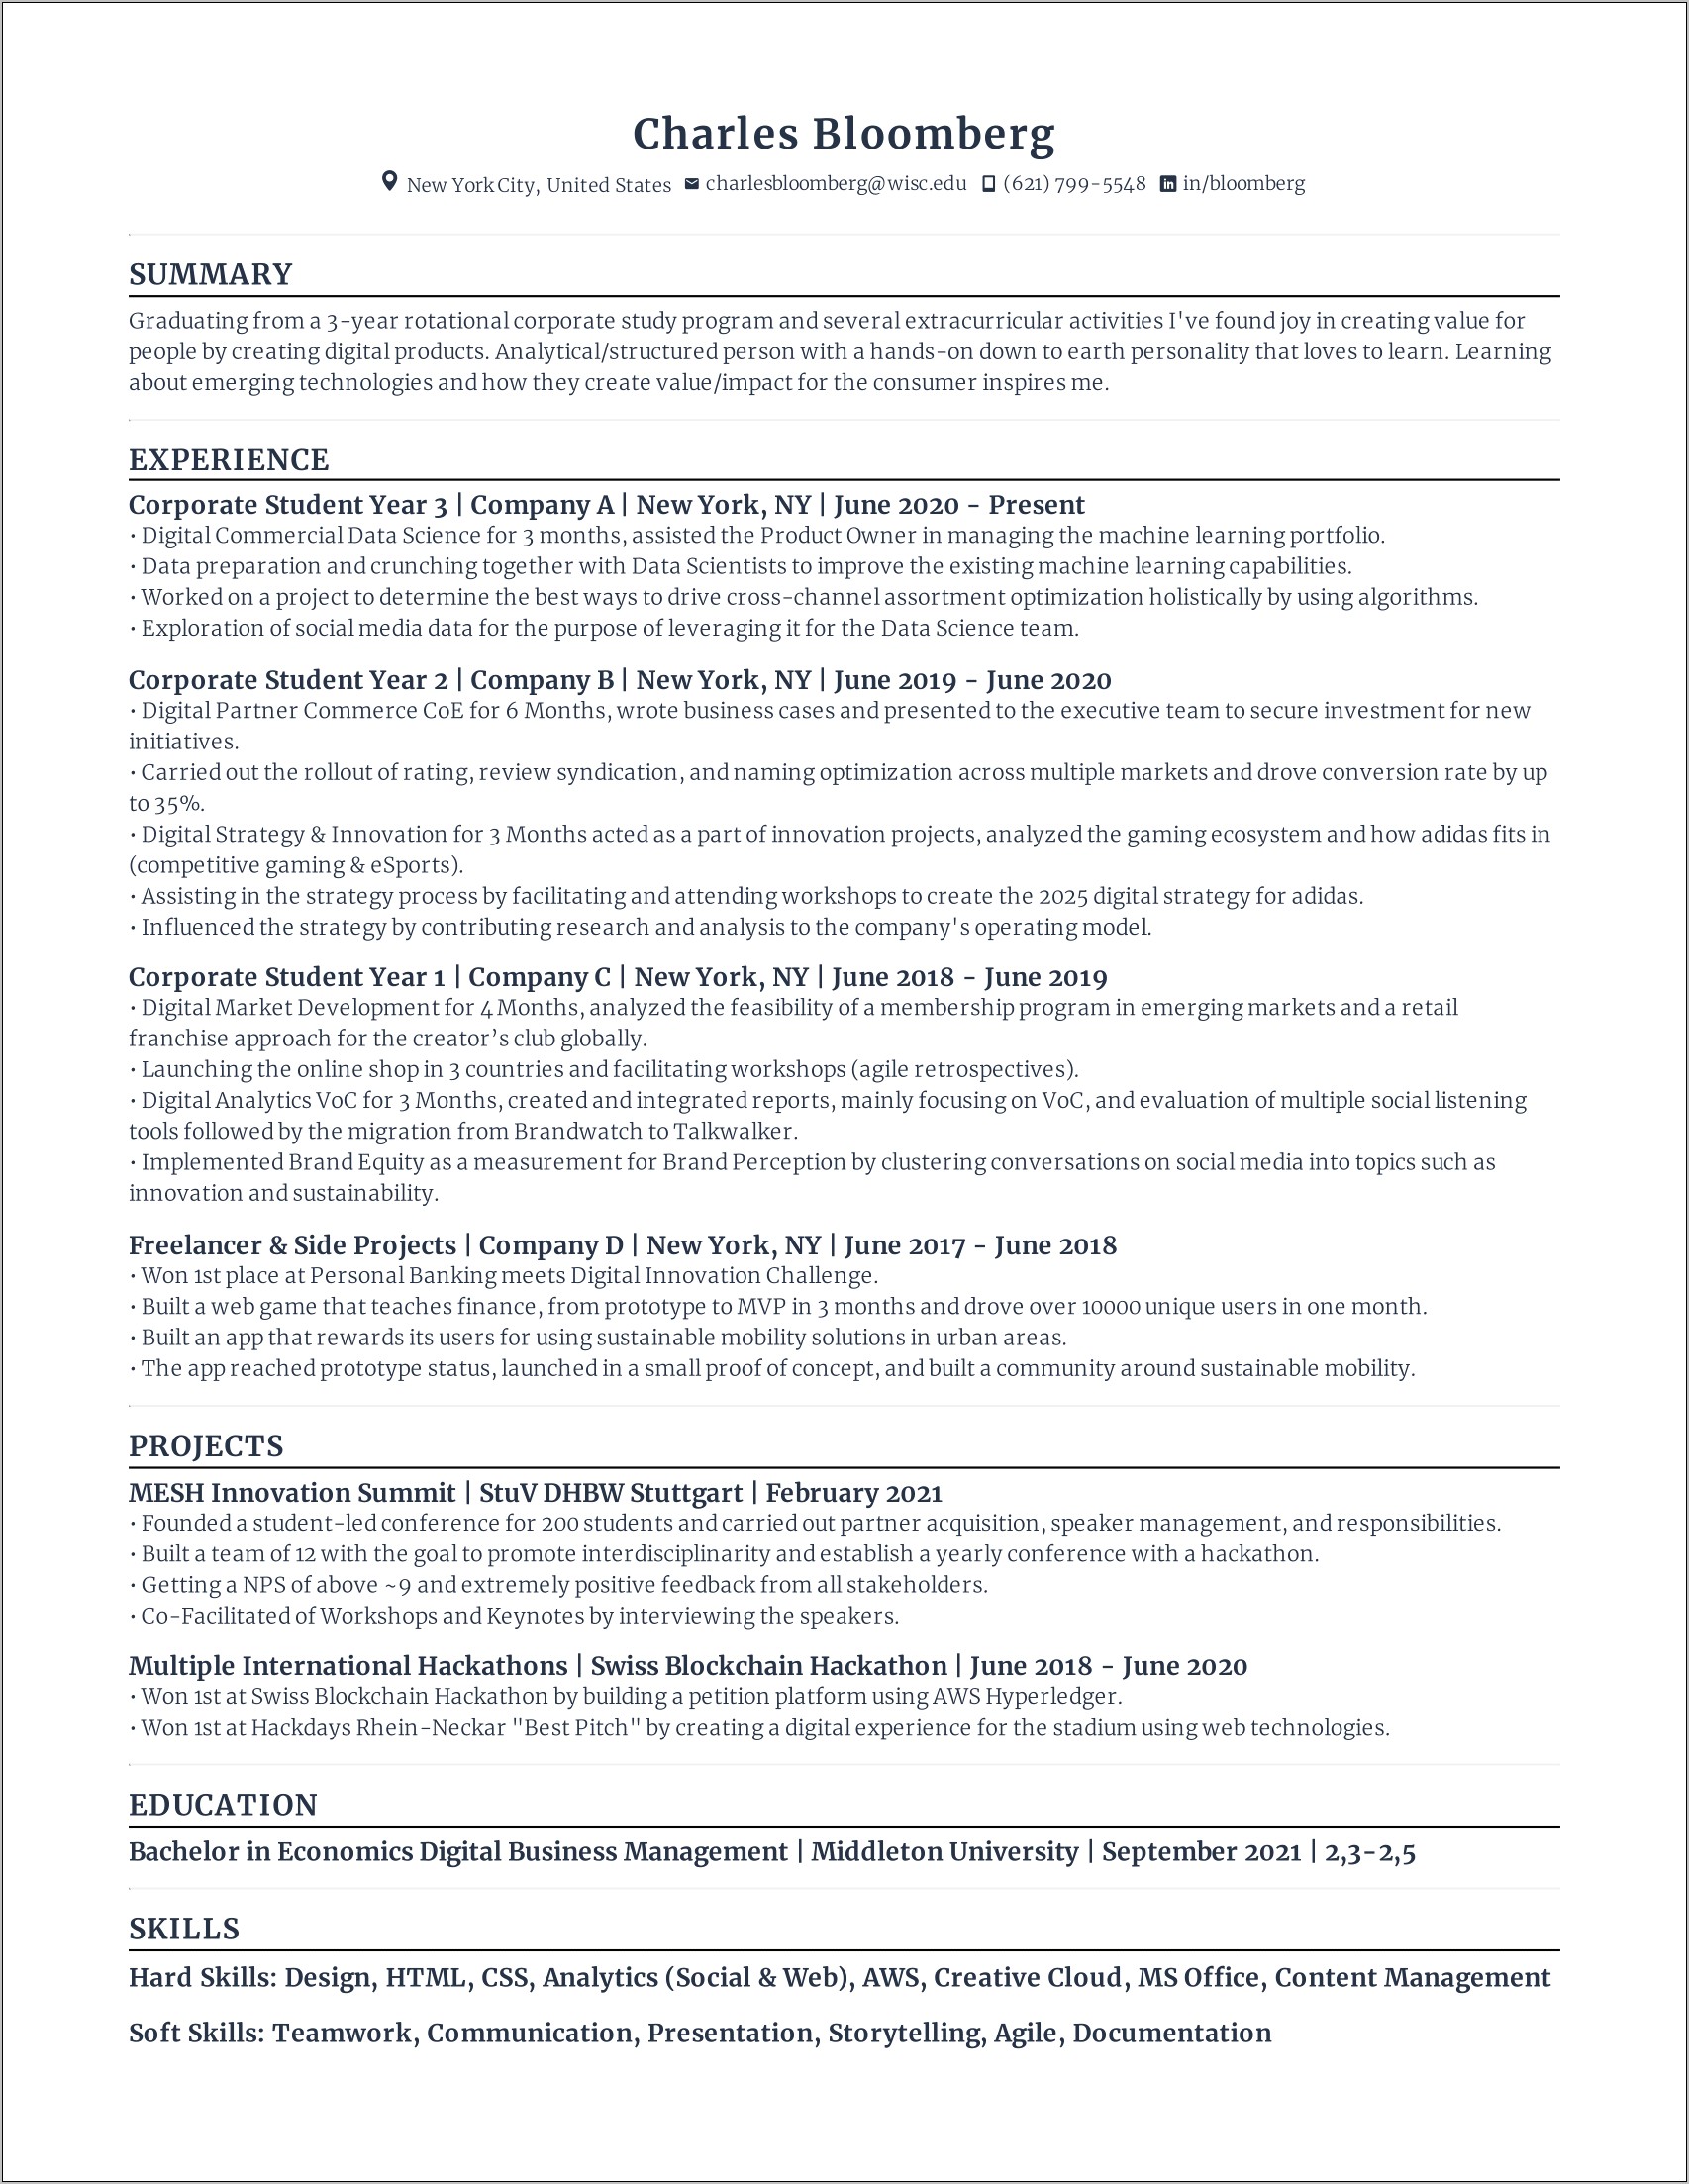 short summary for resume with no experience